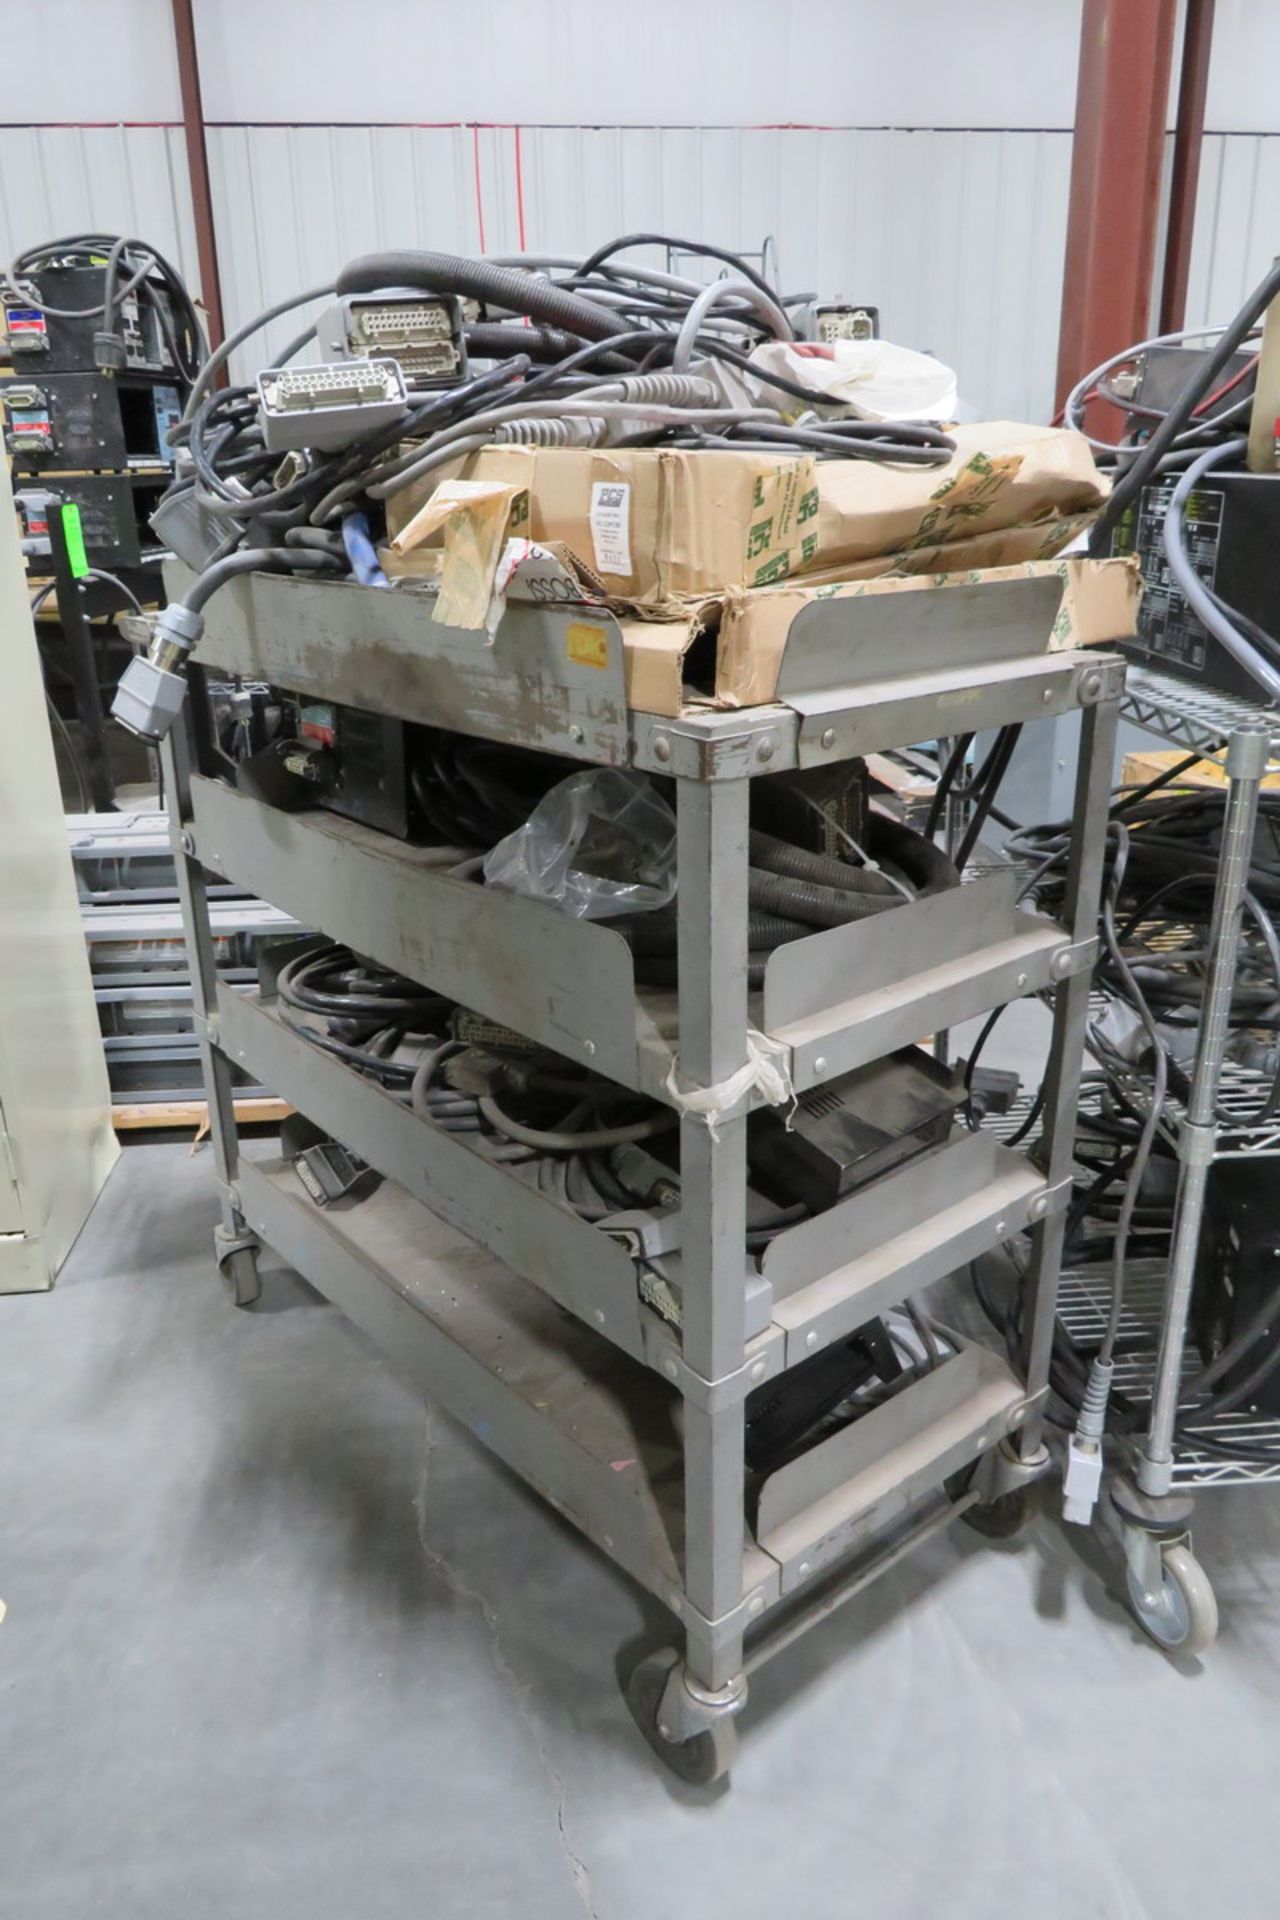 Hot Runner Controller Housing, Assorted Cabling, Material Cart - Image 3 of 3